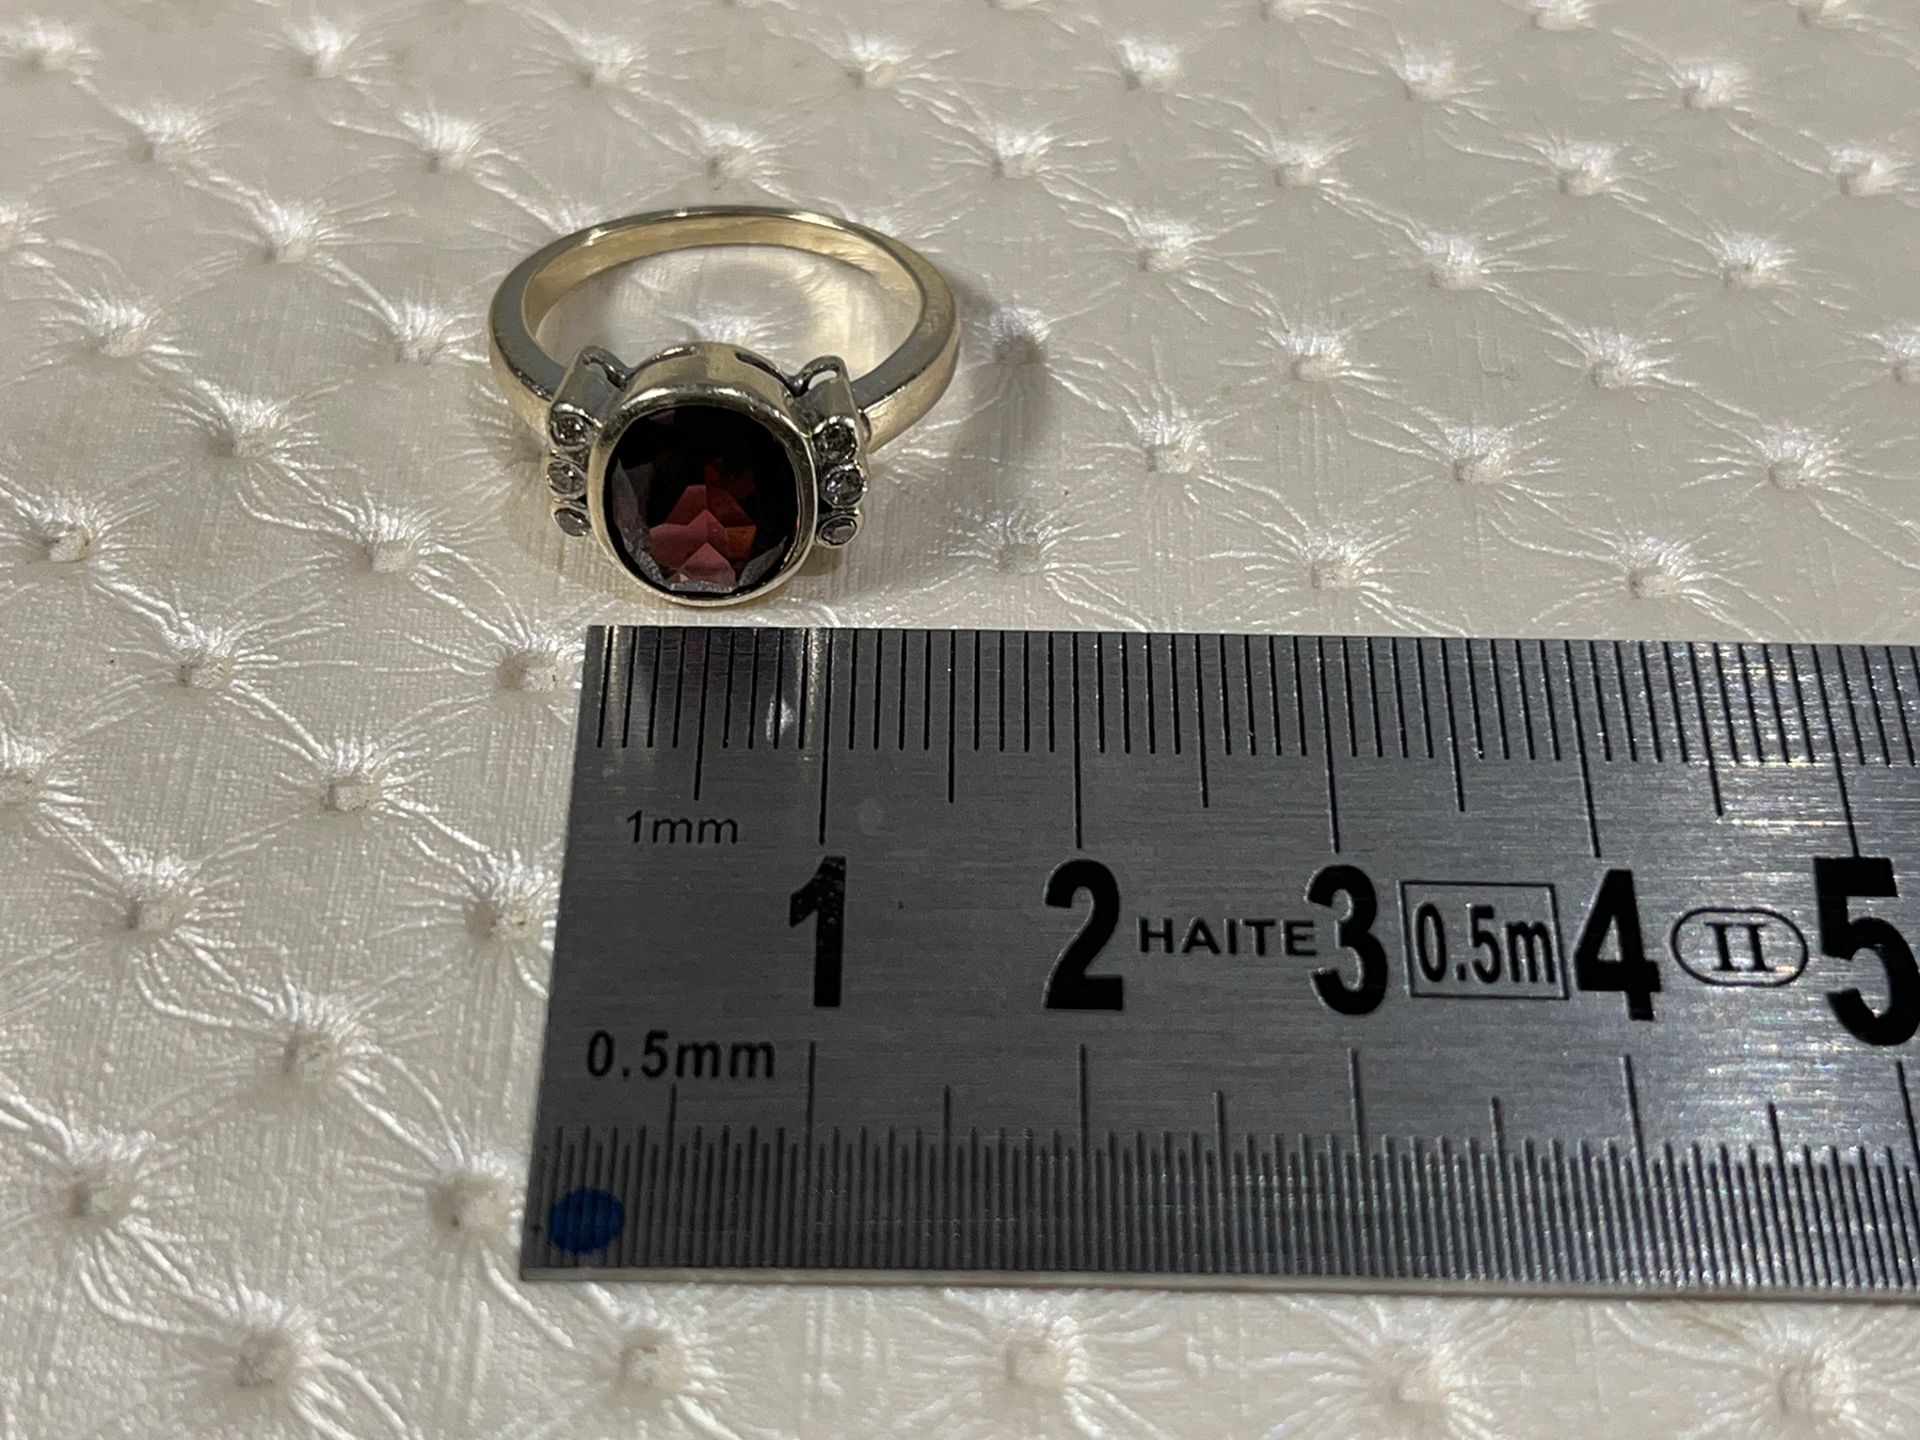 18k white gold ring with brilliant cut diamonds and garnet - Weight: 5gr - 350 - Image 7 of 7